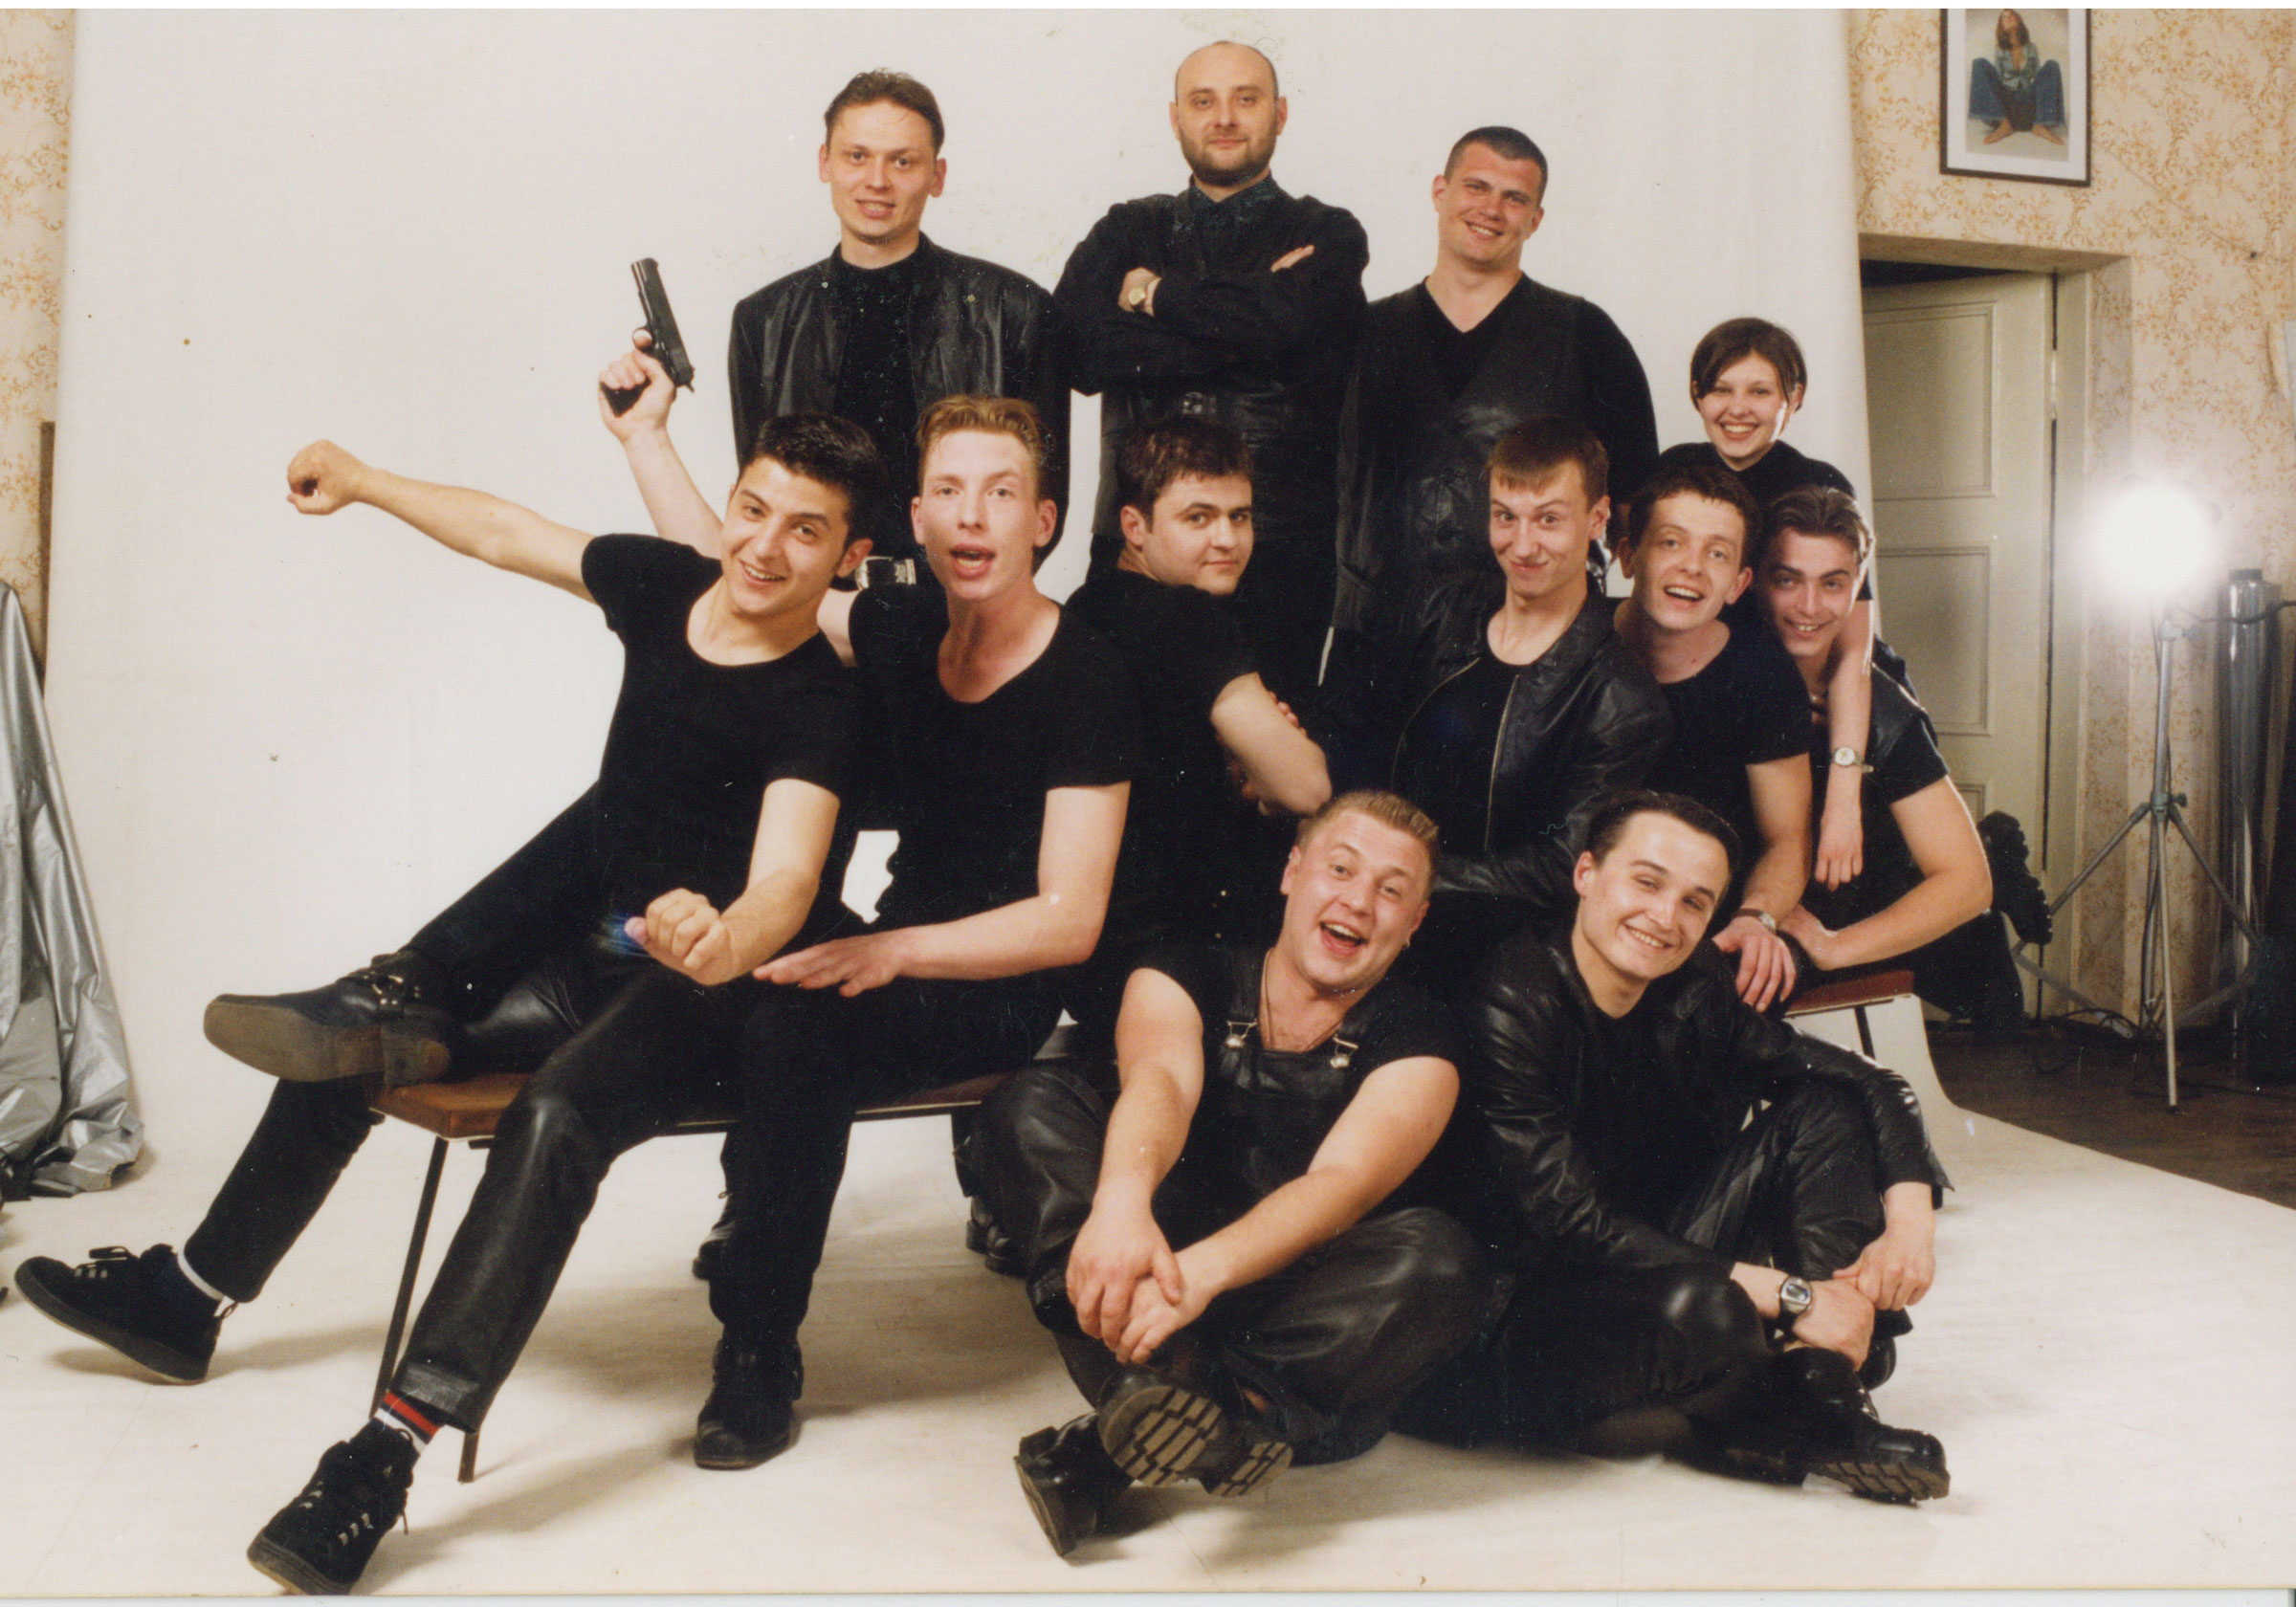 Zelensky, far left, poses with his comedy group, Kvartal 95